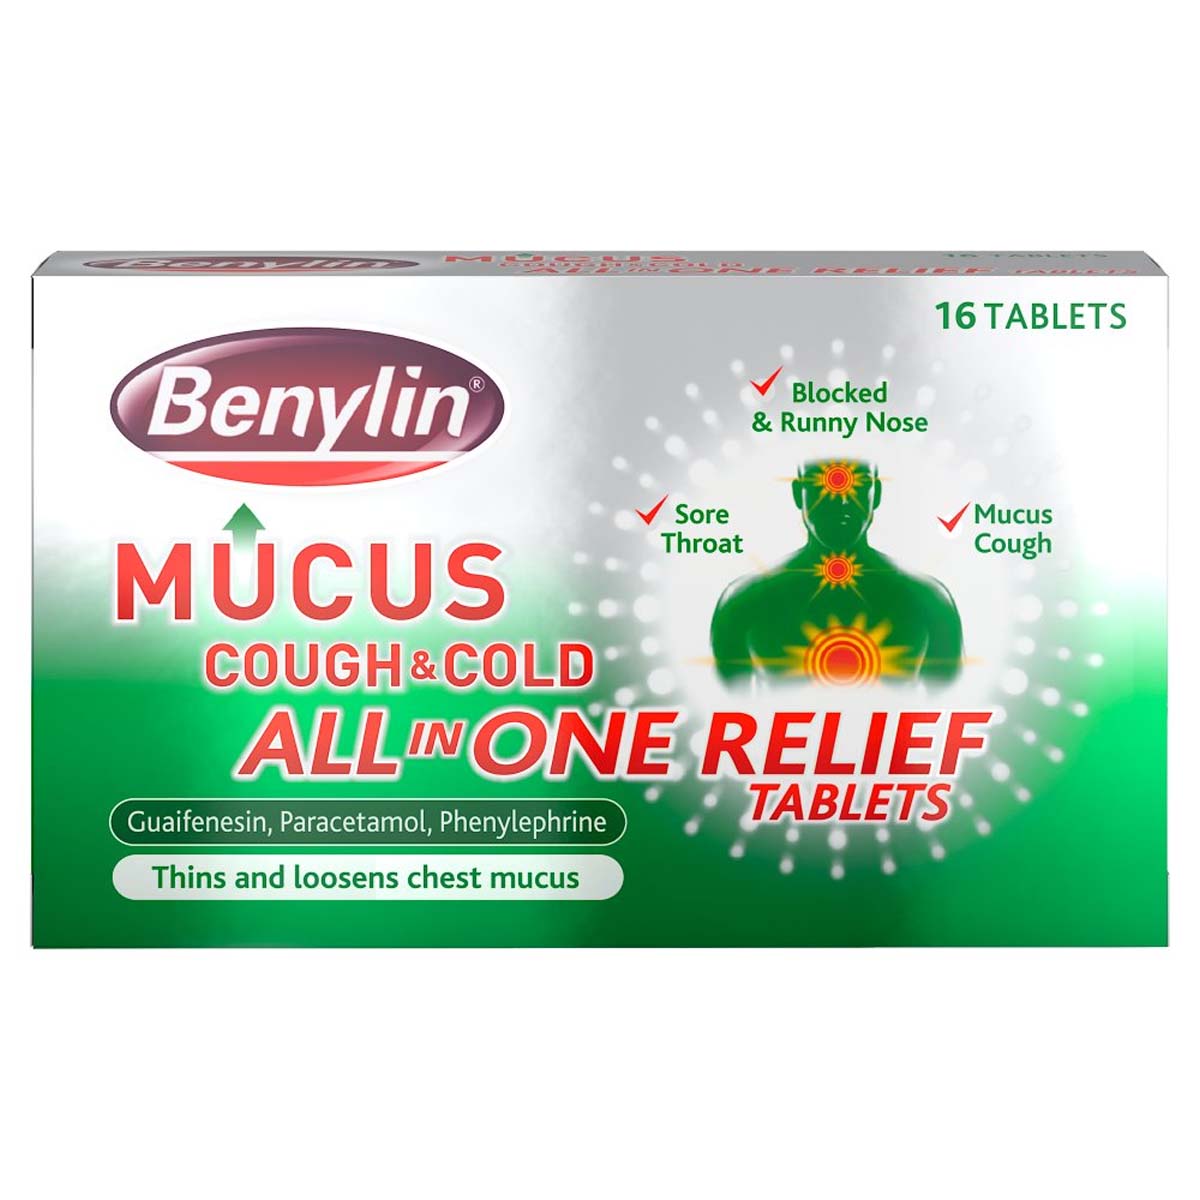 Benylin - Mucus Cough & Cold All in One Relief Tablets - 16 Tablets - Continental Food Store